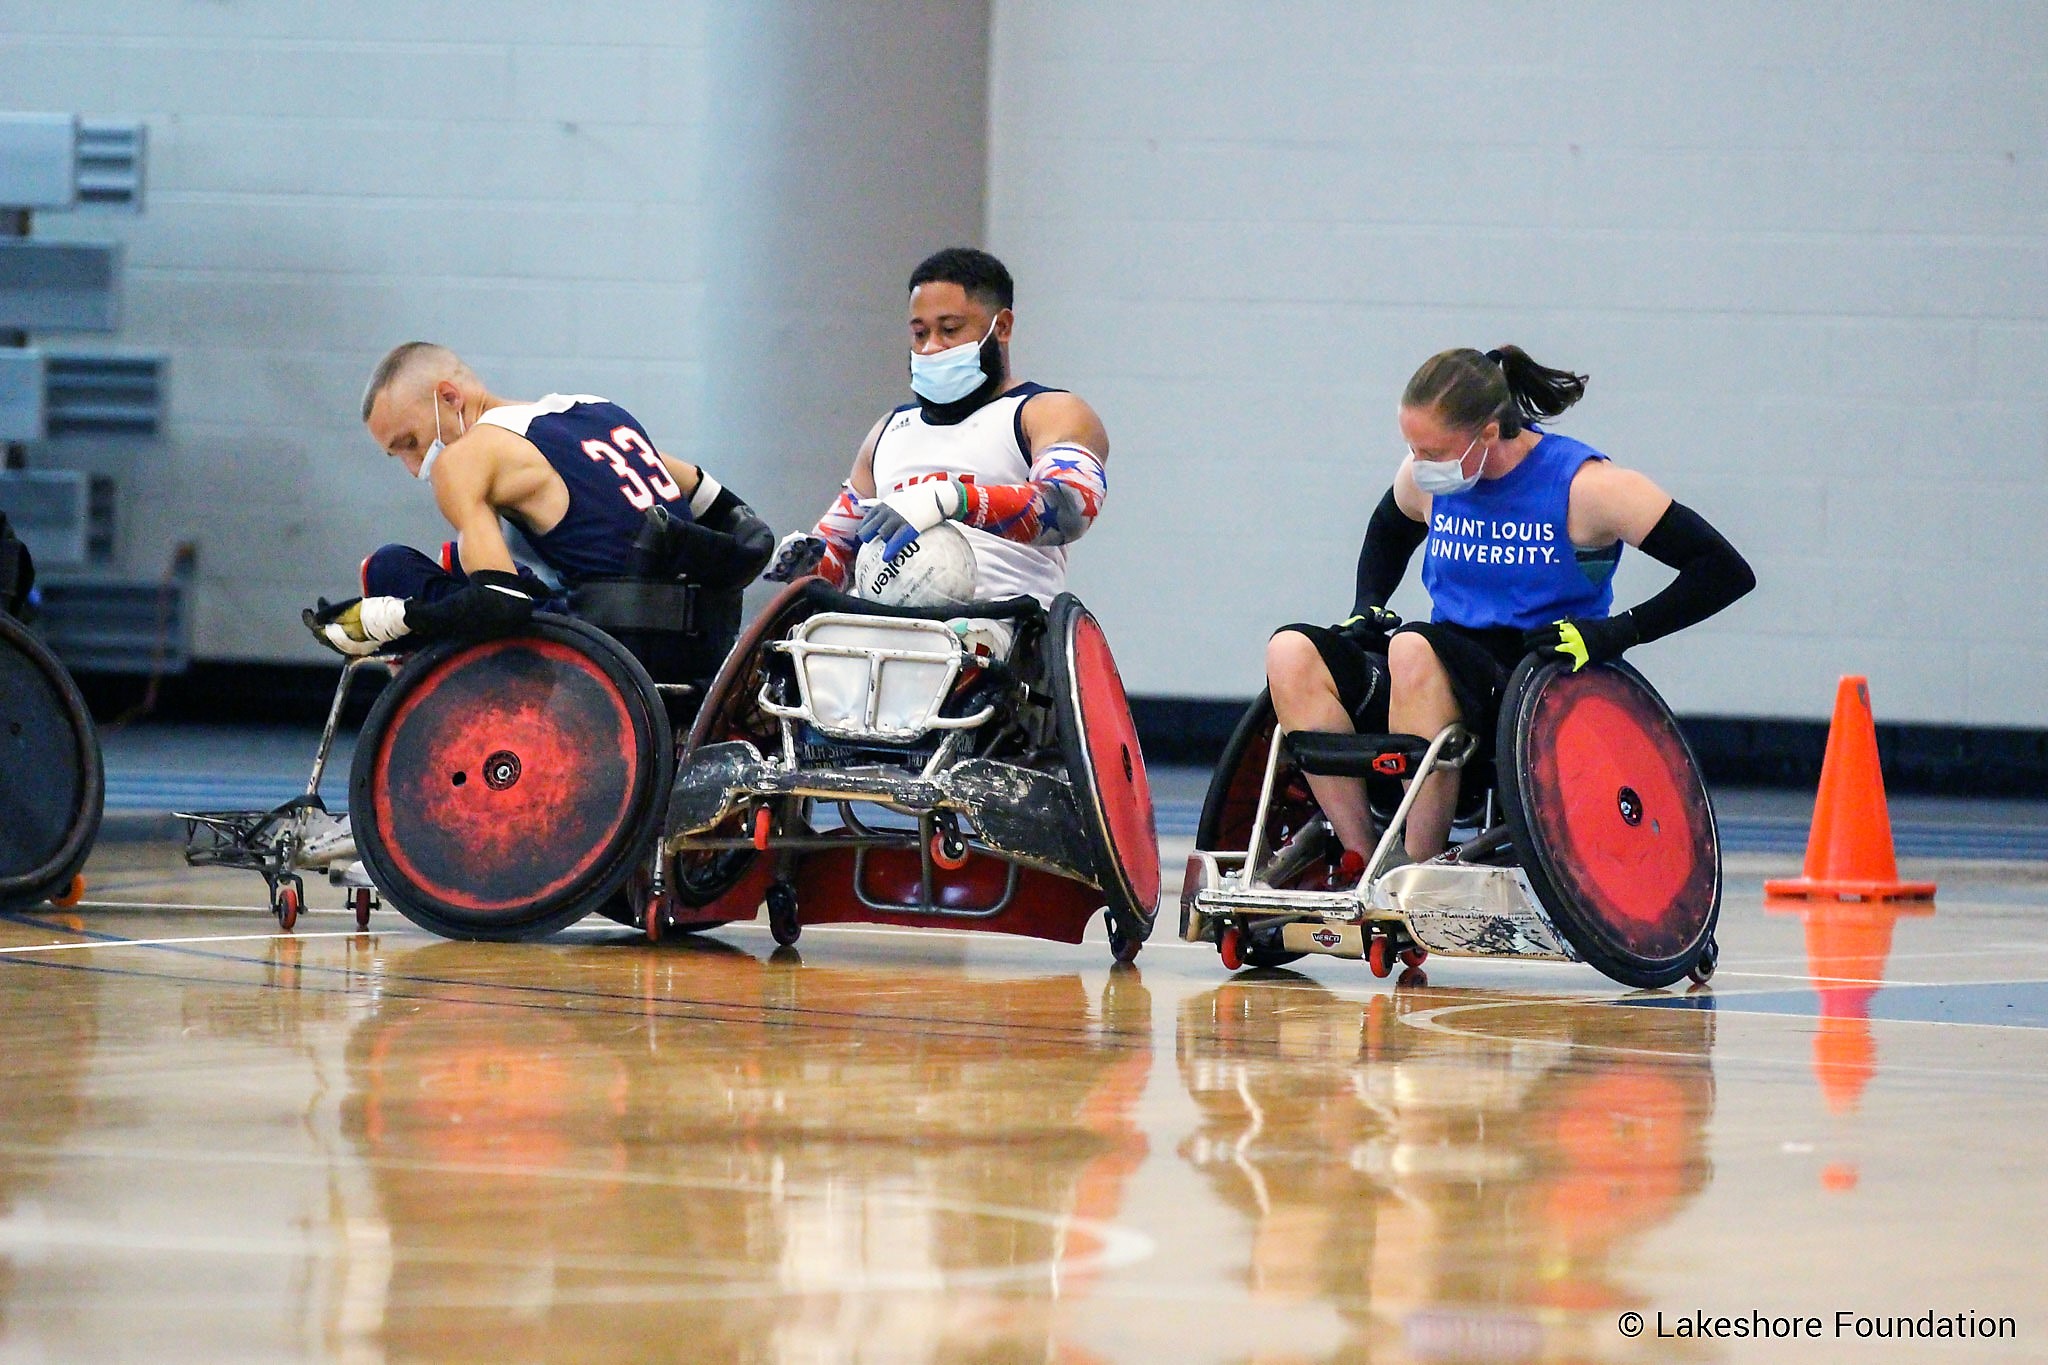 Pic 1 of 3, Sarah Adam, OTD, was diagnosed with multiple sclerosis. She began playing wheelchair rugby recreationally in 2017 and competitively in 2019. Photo by Lakeshore Foundation.